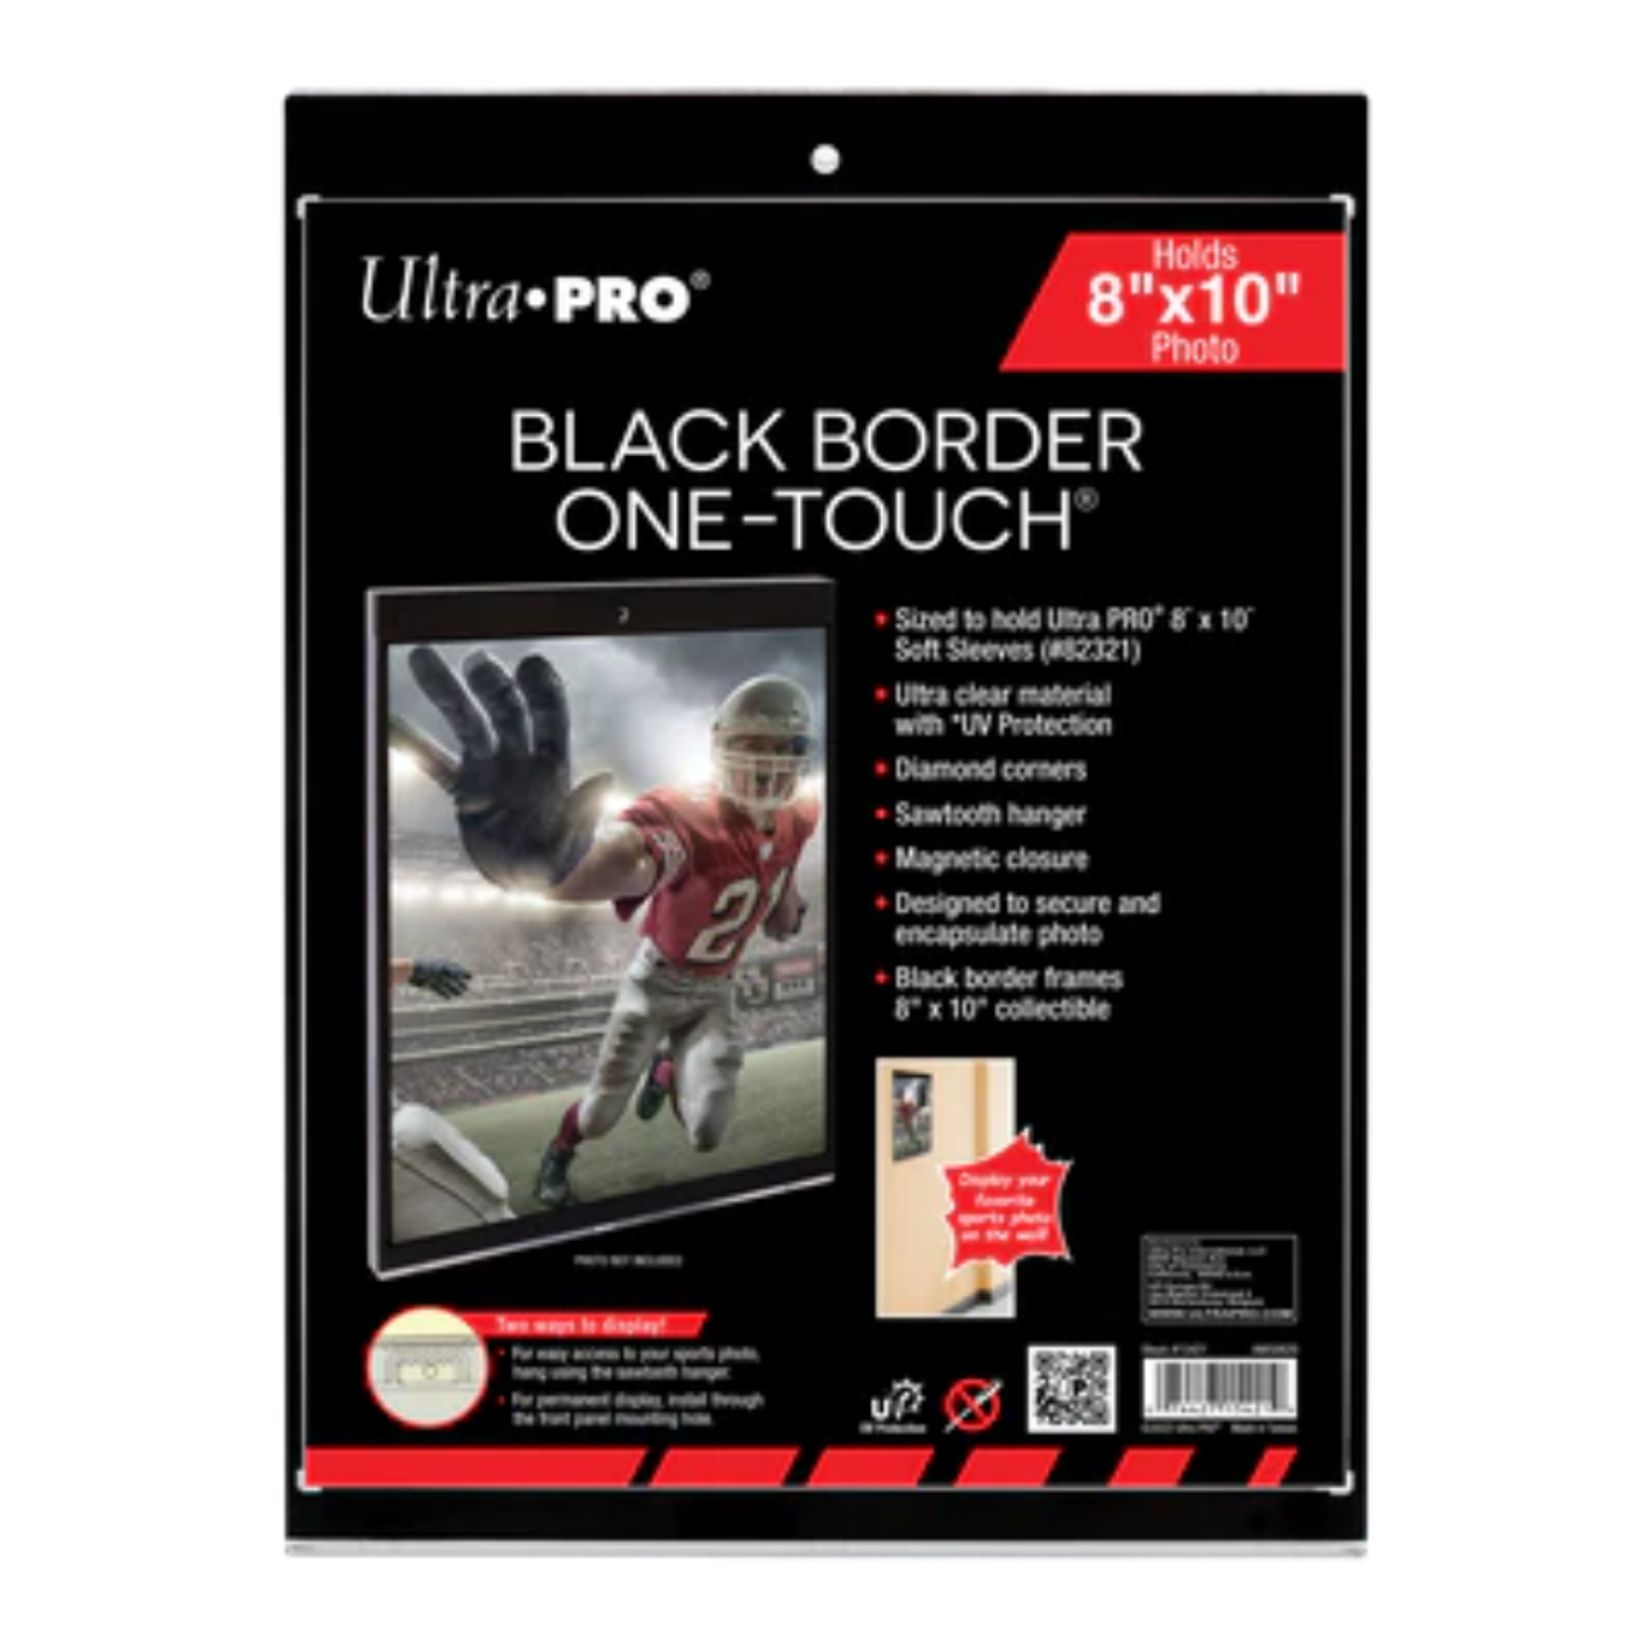 Ultra Pro One-Touch 8" x 10" - Black Border